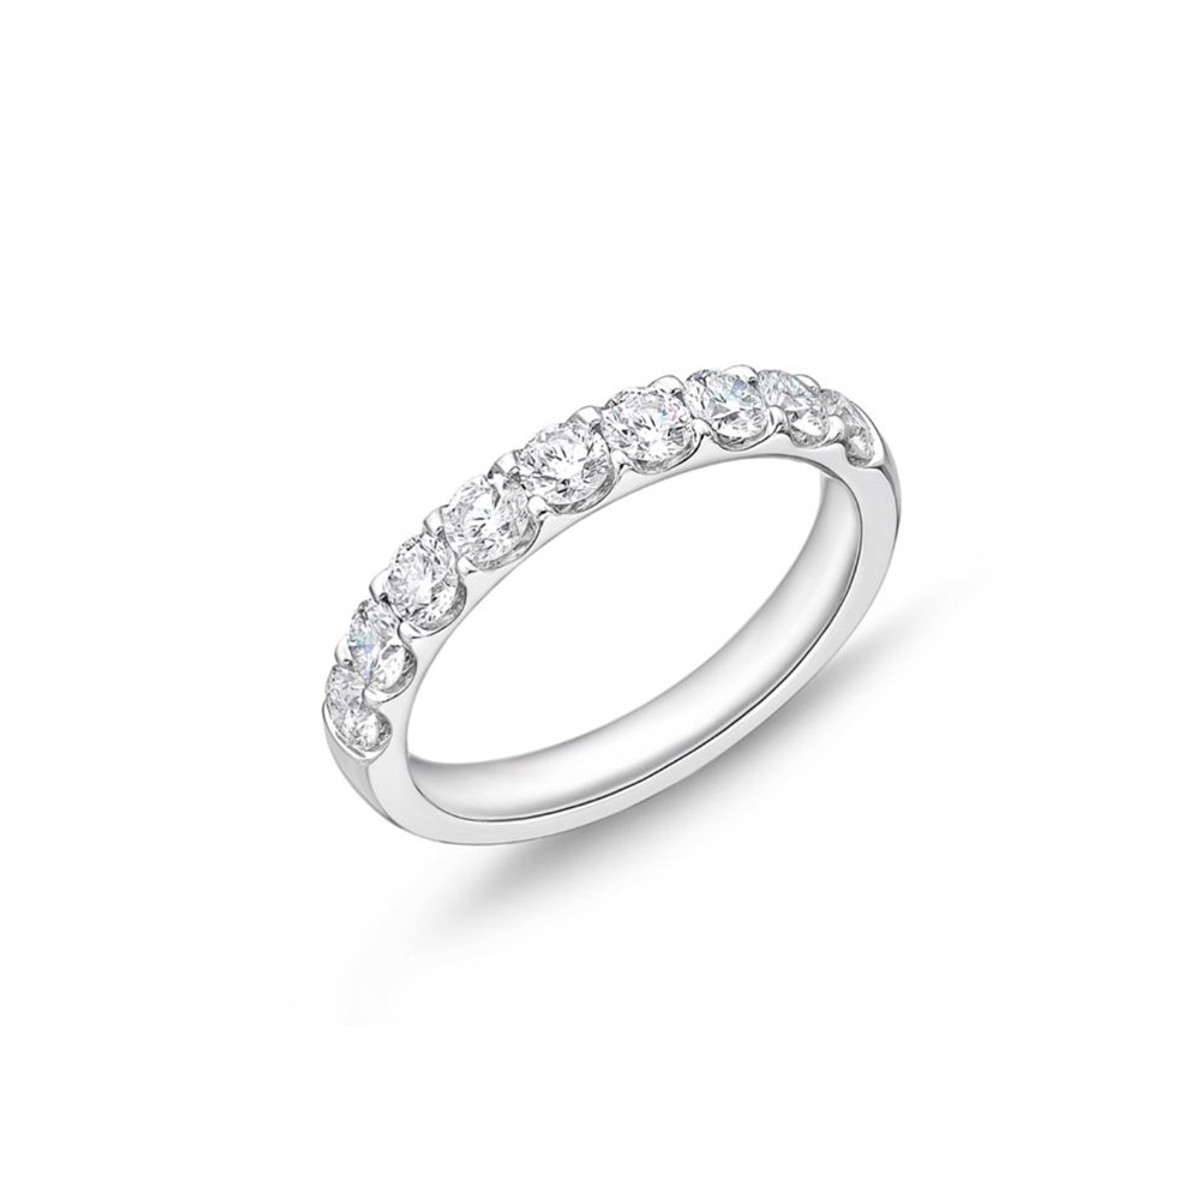 Hyde Park Collection 18K White Gold Diamond Band-43173 Product Image